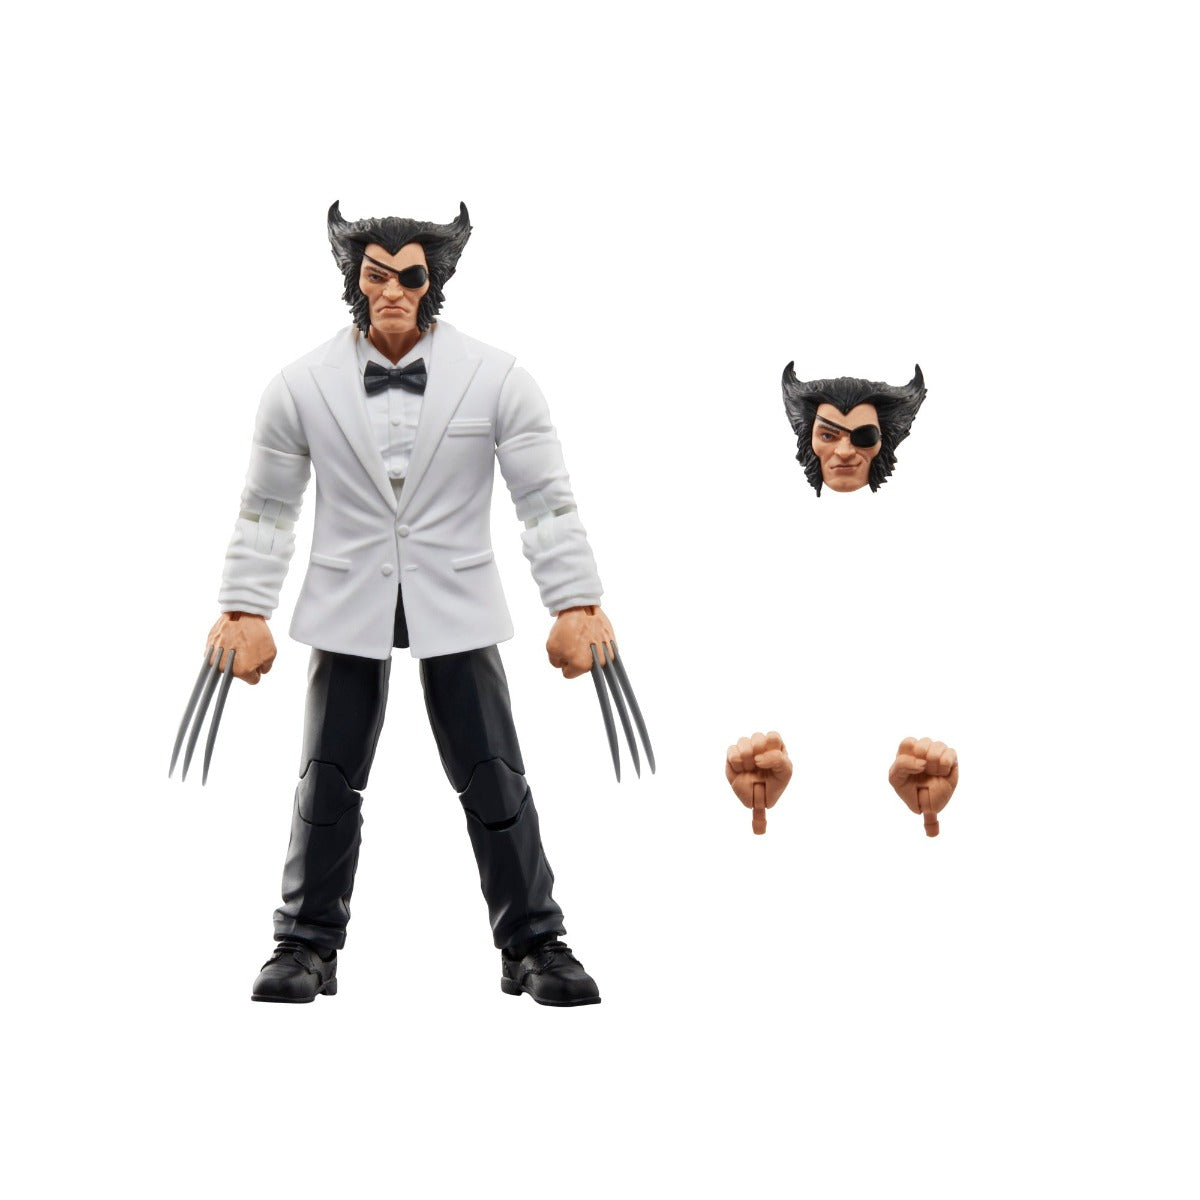 Marvel Legends Series Marvel's Patch and Joe Fixit, Wolverine 50th Anniversary Comics Collectible 6-Inch Scale Action Figure 2-Pack